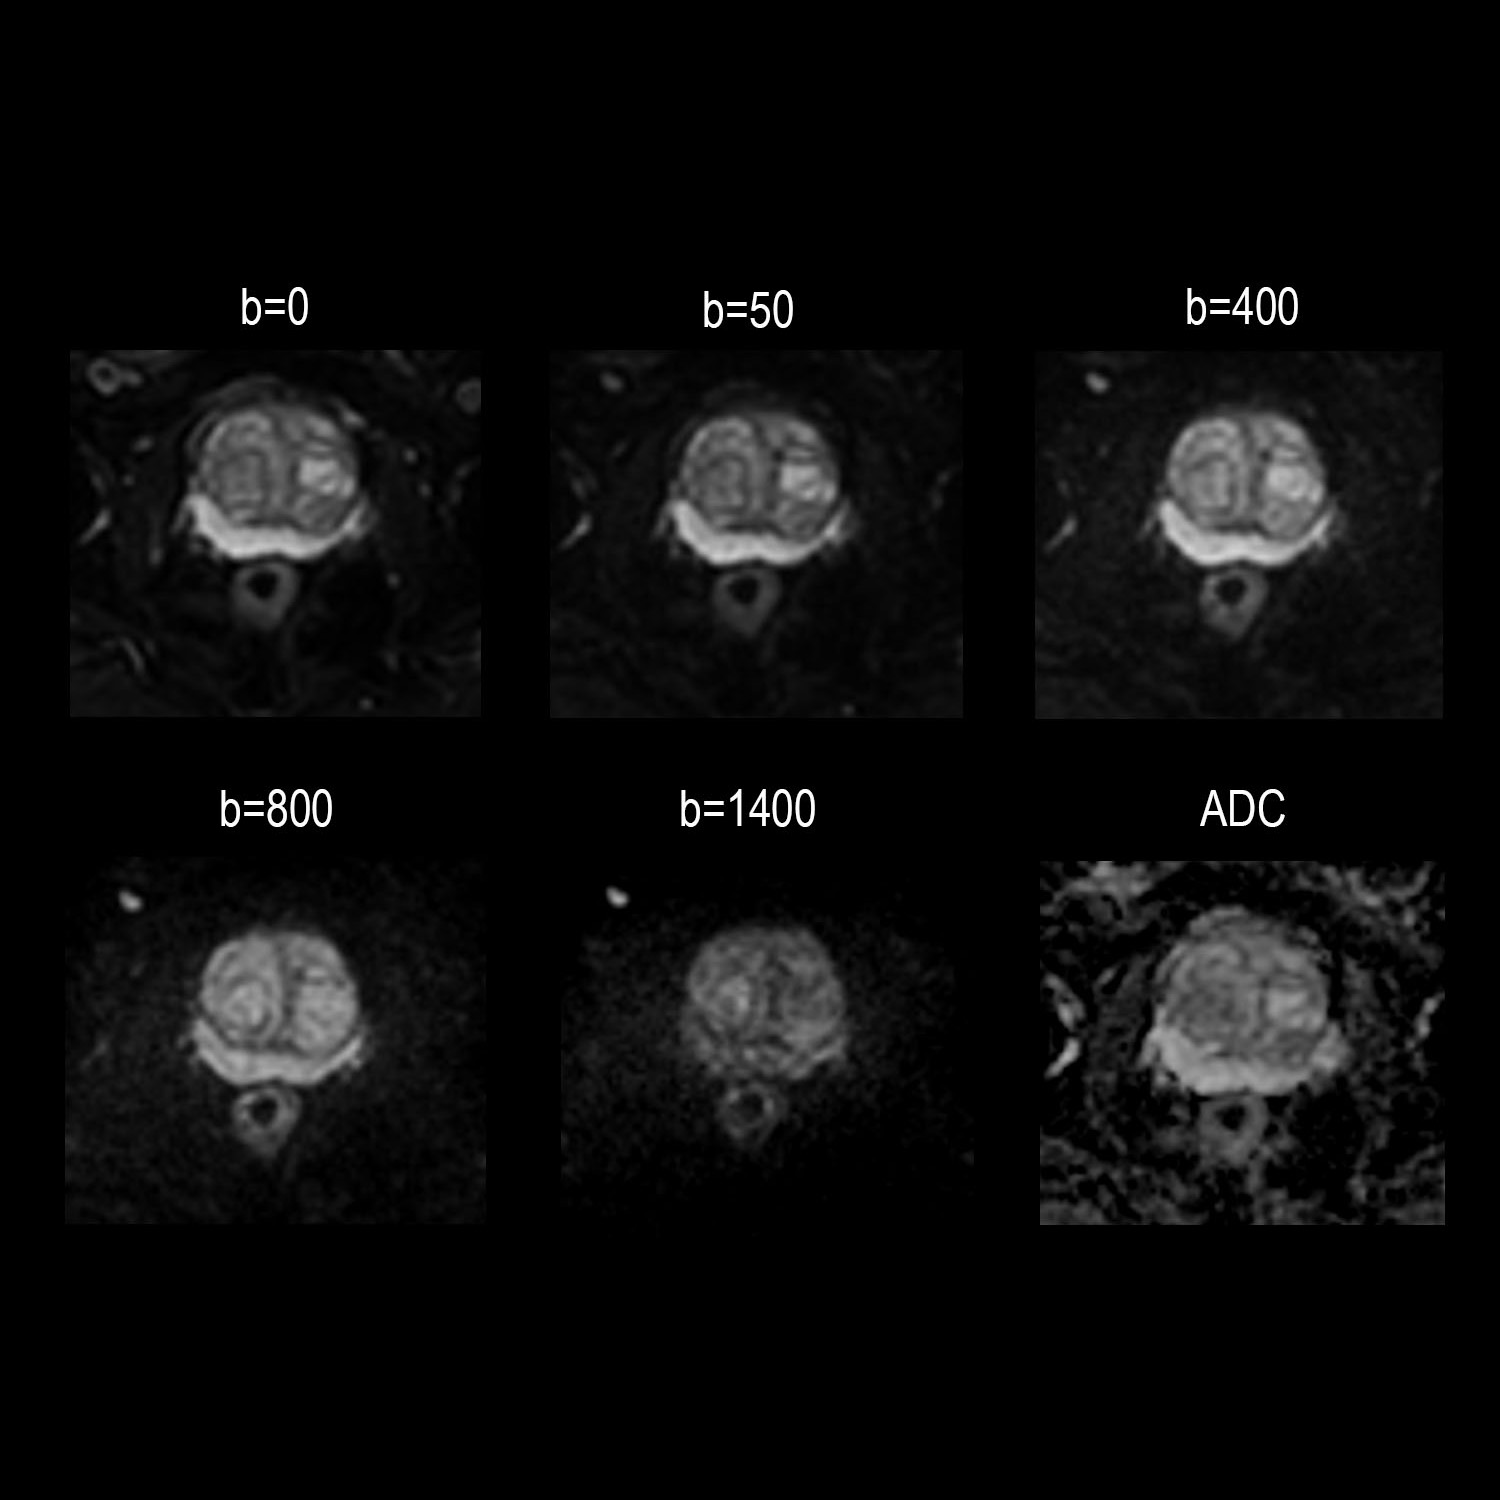 Routine Prostate Imaging with AiCE